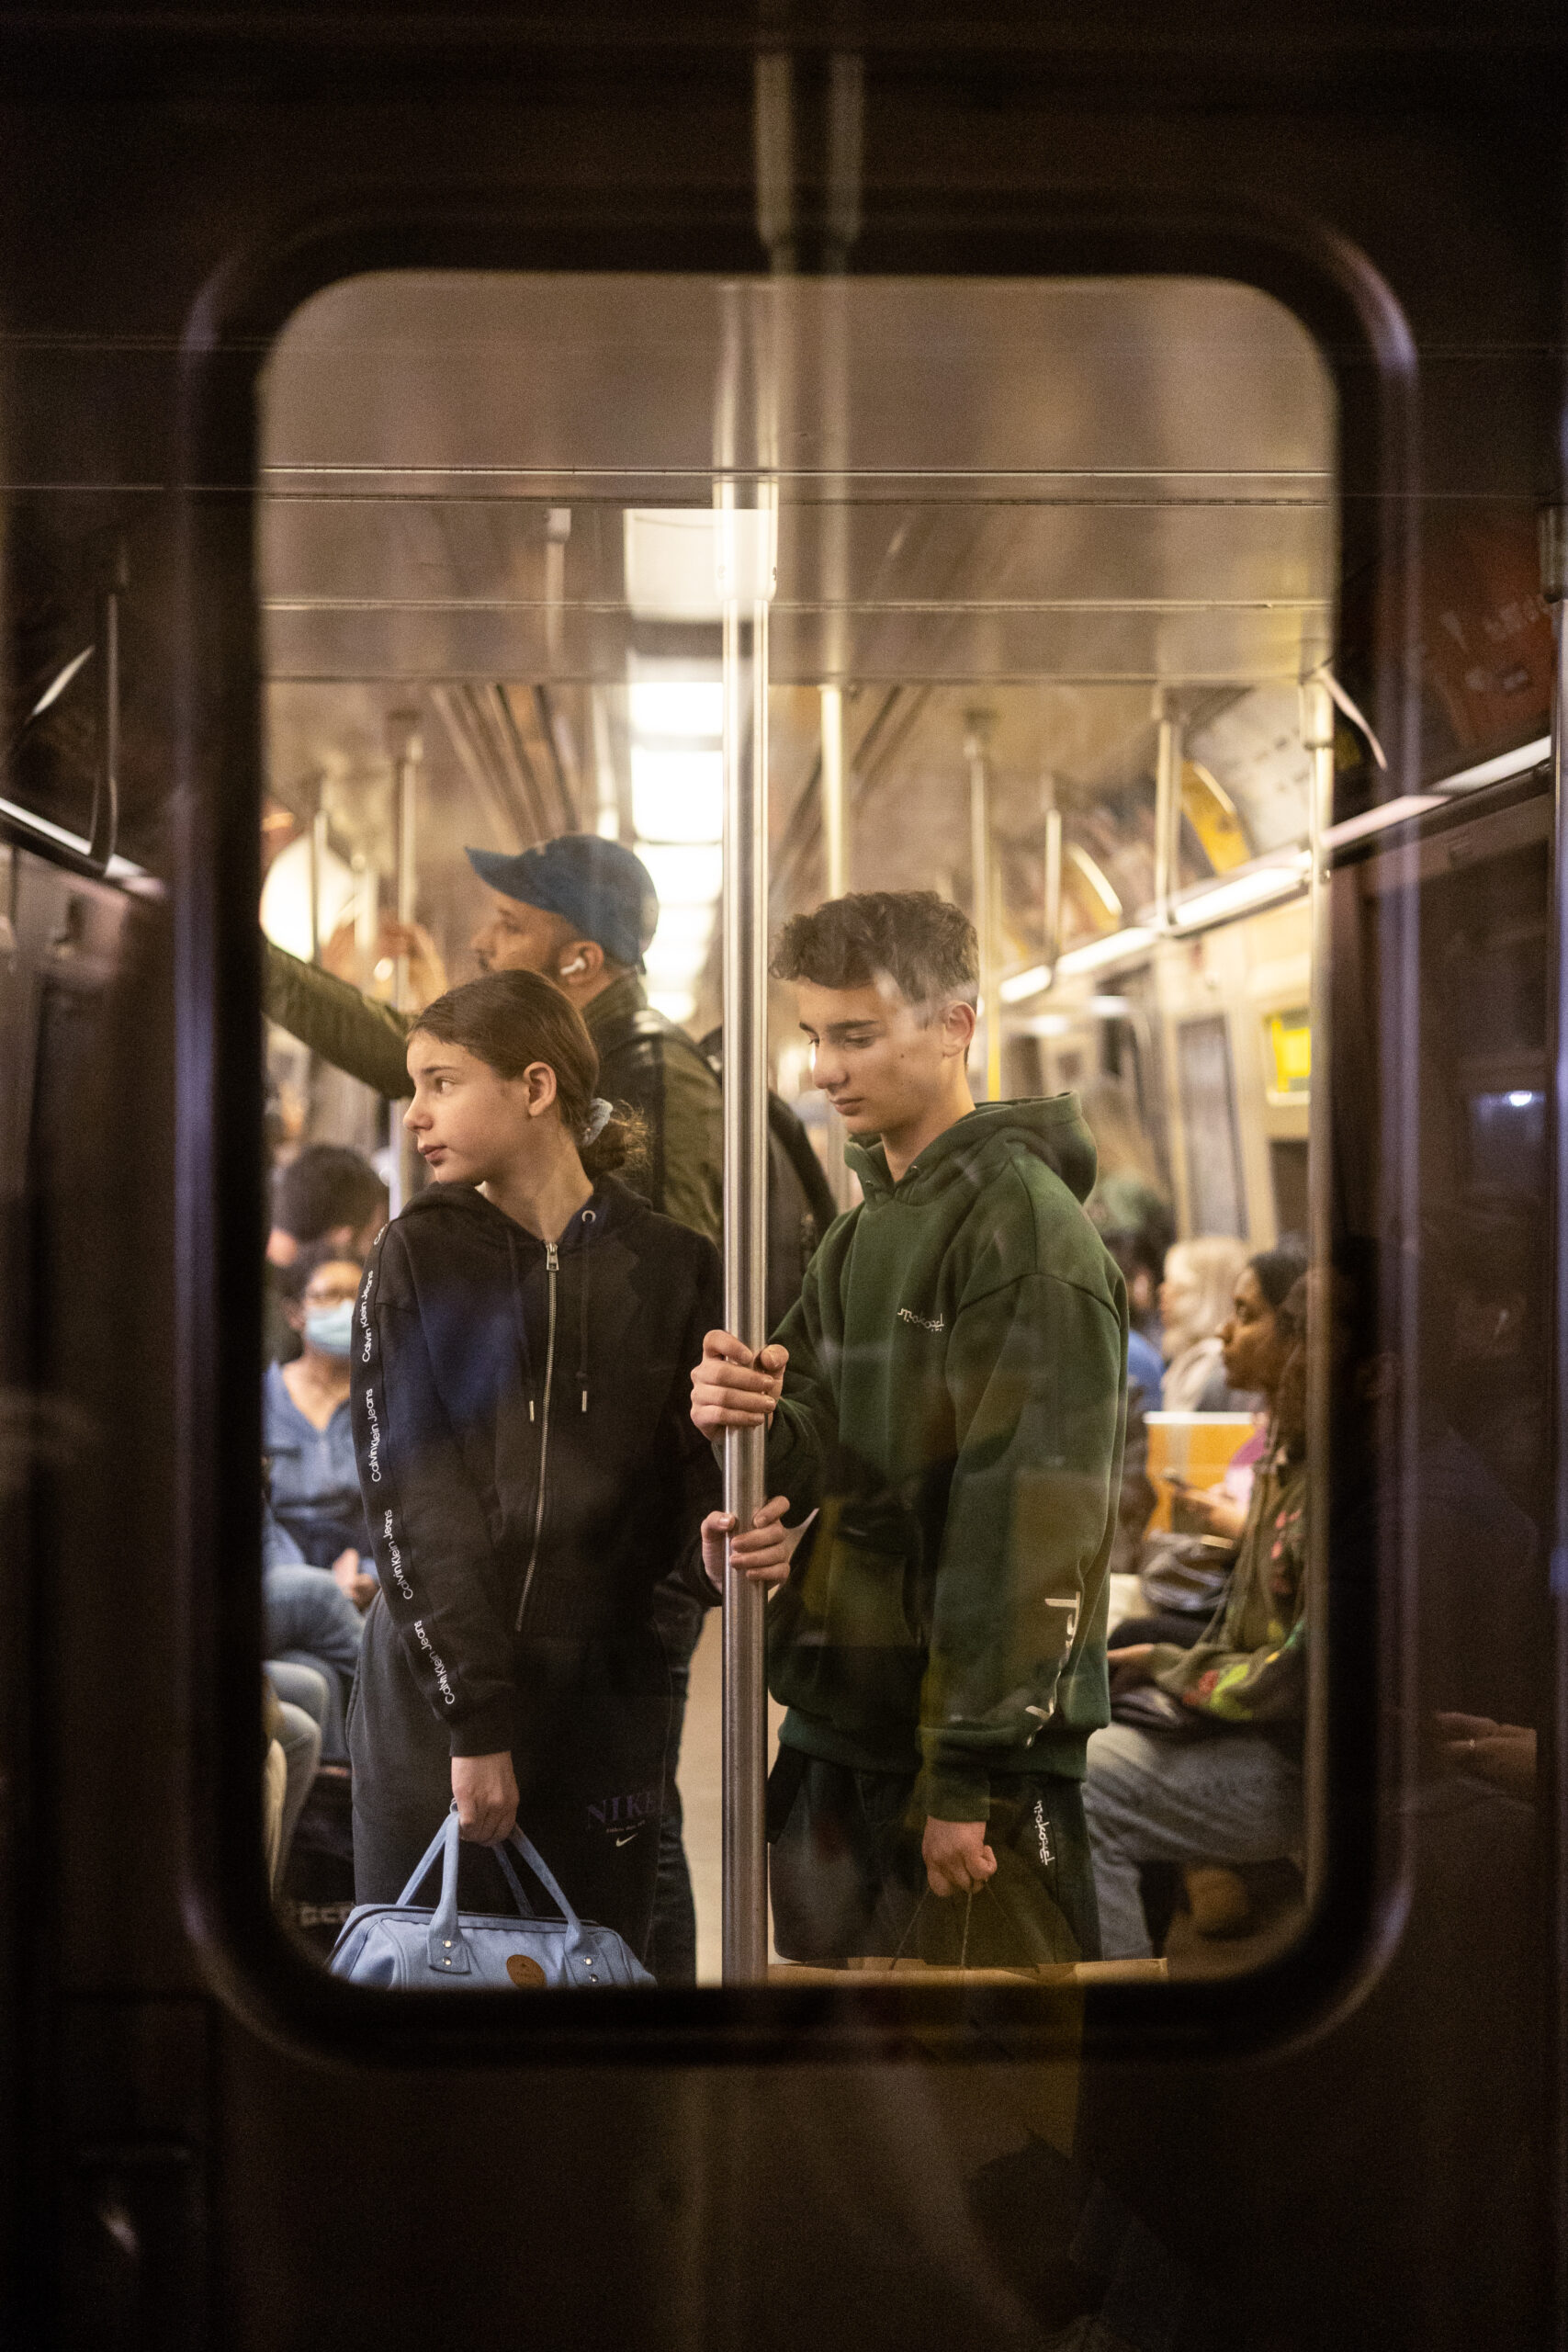 A young woman and a young man stand at the front of the next subway car sharing a pole. While she looks to the left at something in the distance, he looks down at her feet. They are framed by the window at the end of the subway. The reflection off two panes of glass casts linear stripes of light which continue out of frame. The two panes of glass also cast a reflection of the pole which extends out of the primary frame. 